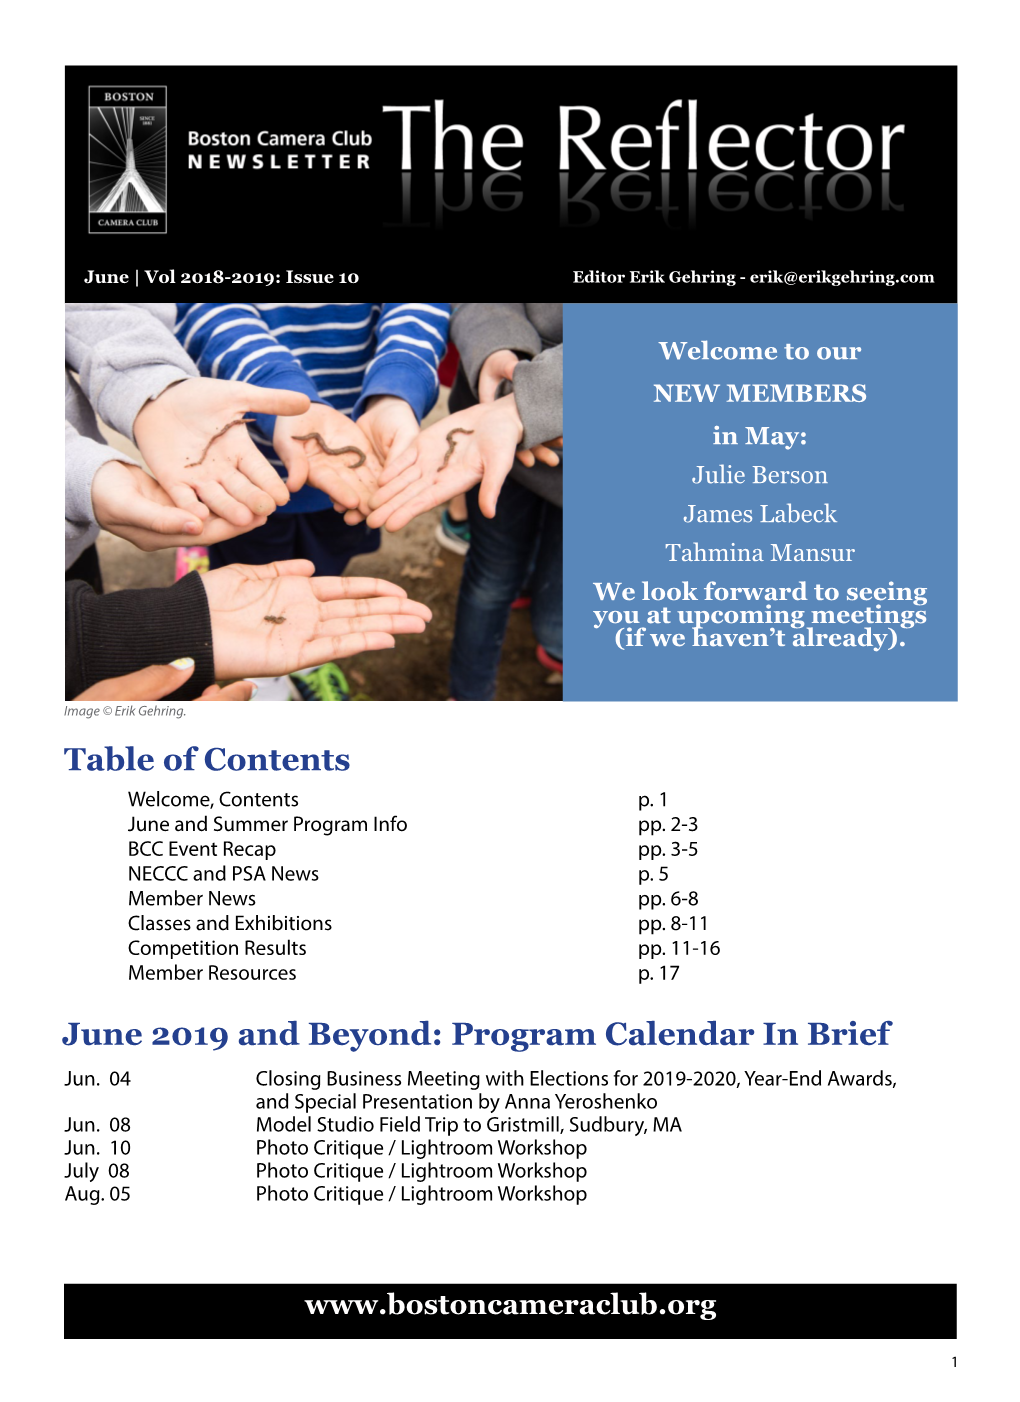 Table of Contents June 2019 and Beyond: Program Calendar in Brief